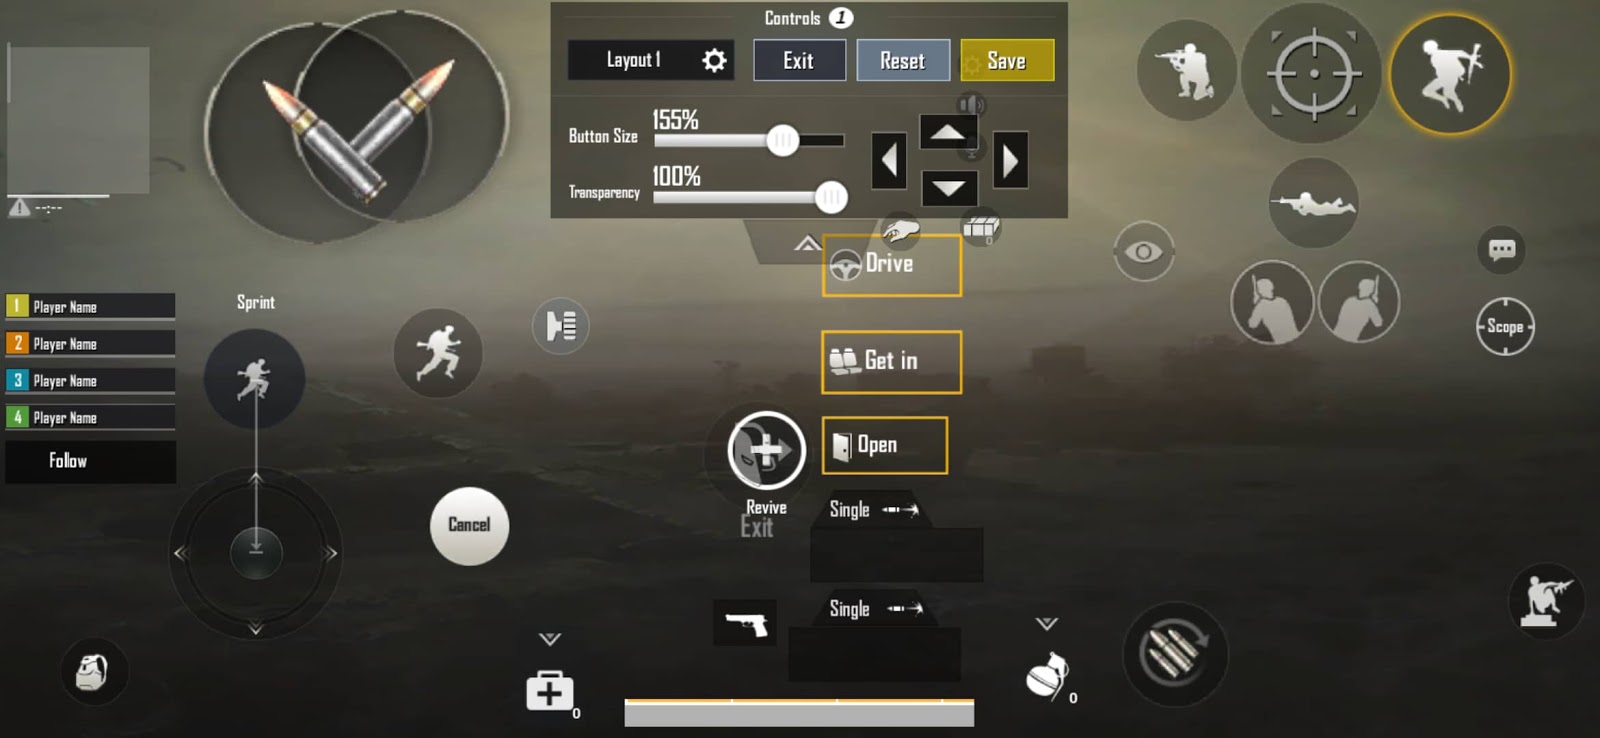 Best 4 Finger Claw PUBG MOBILE Layout